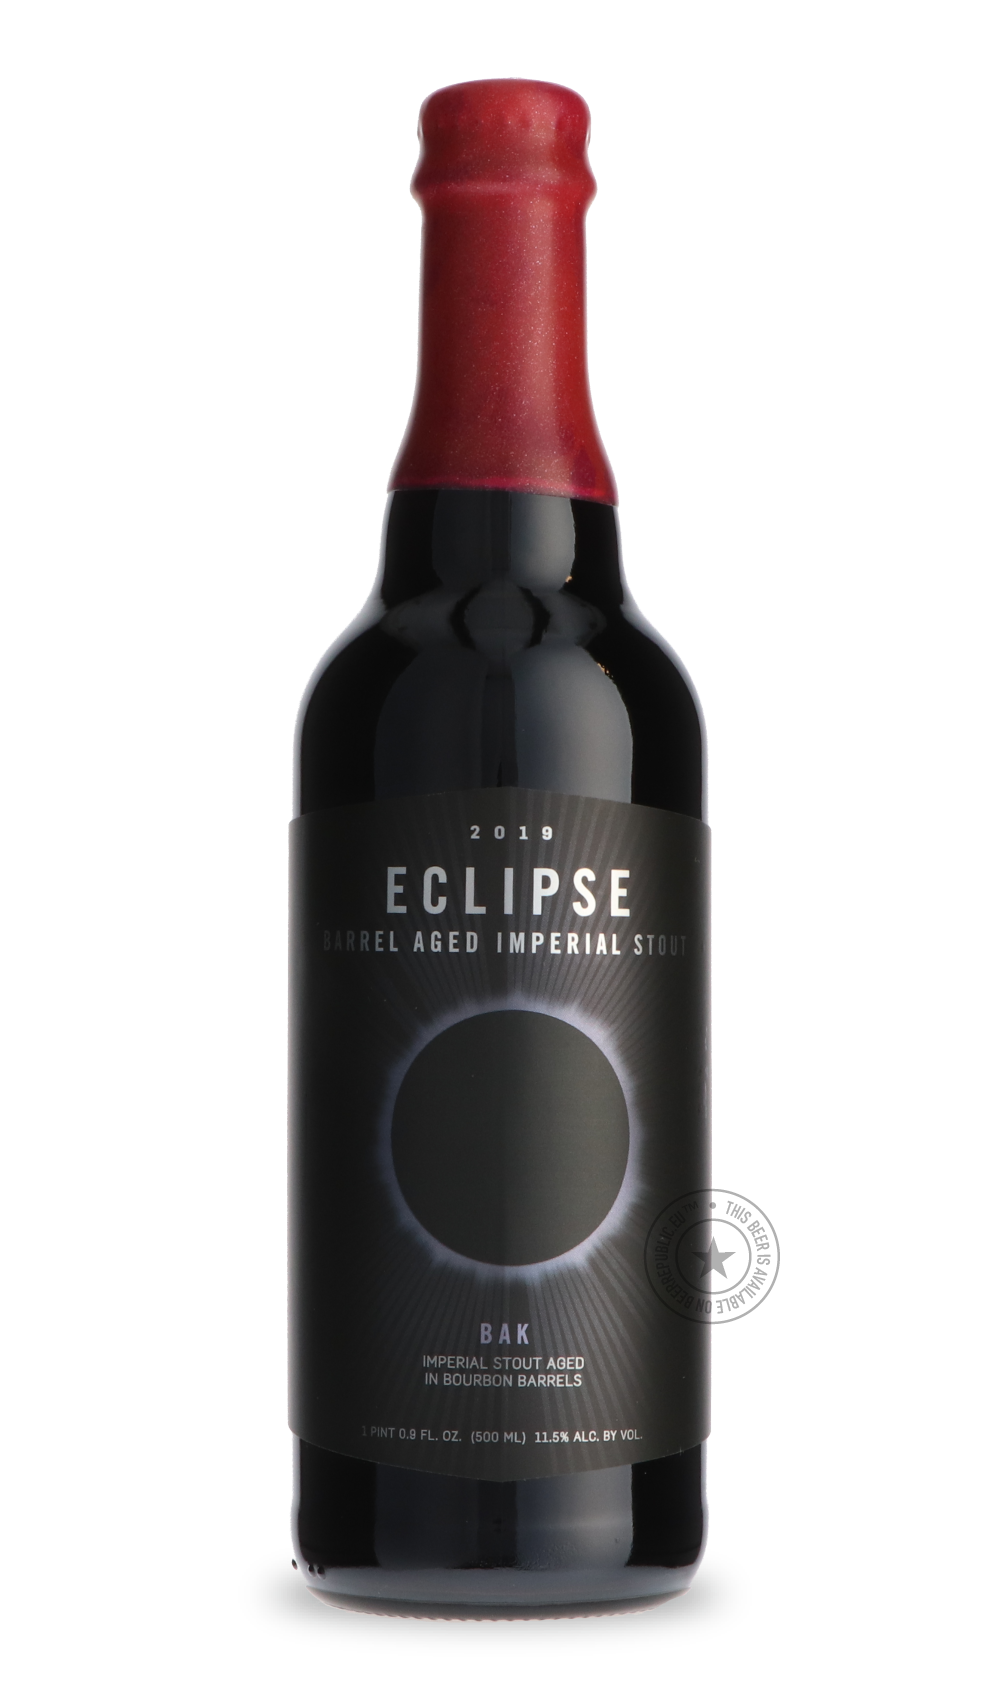 -FiftyFifty- Eclipse - Bakers (BAK)(2019)-Stout & Porter- Only @ Beer Republic - The best online beer store for American & Canadian craft beer - Buy beer online from the USA and Canada - Bier online kopen - Amerikaans bier kopen - Craft beer store - Craft beer kopen - Amerikanisch bier kaufen - Bier online kaufen - Acheter biere online - IPA - Stout - Porter - New England IPA - Hazy IPA - Imperial Stout - Barrel Aged - Barrel Aged Imperial Stout - Brown - Dark beer - Blond - Blonde - Pilsner - Lager - Wheat